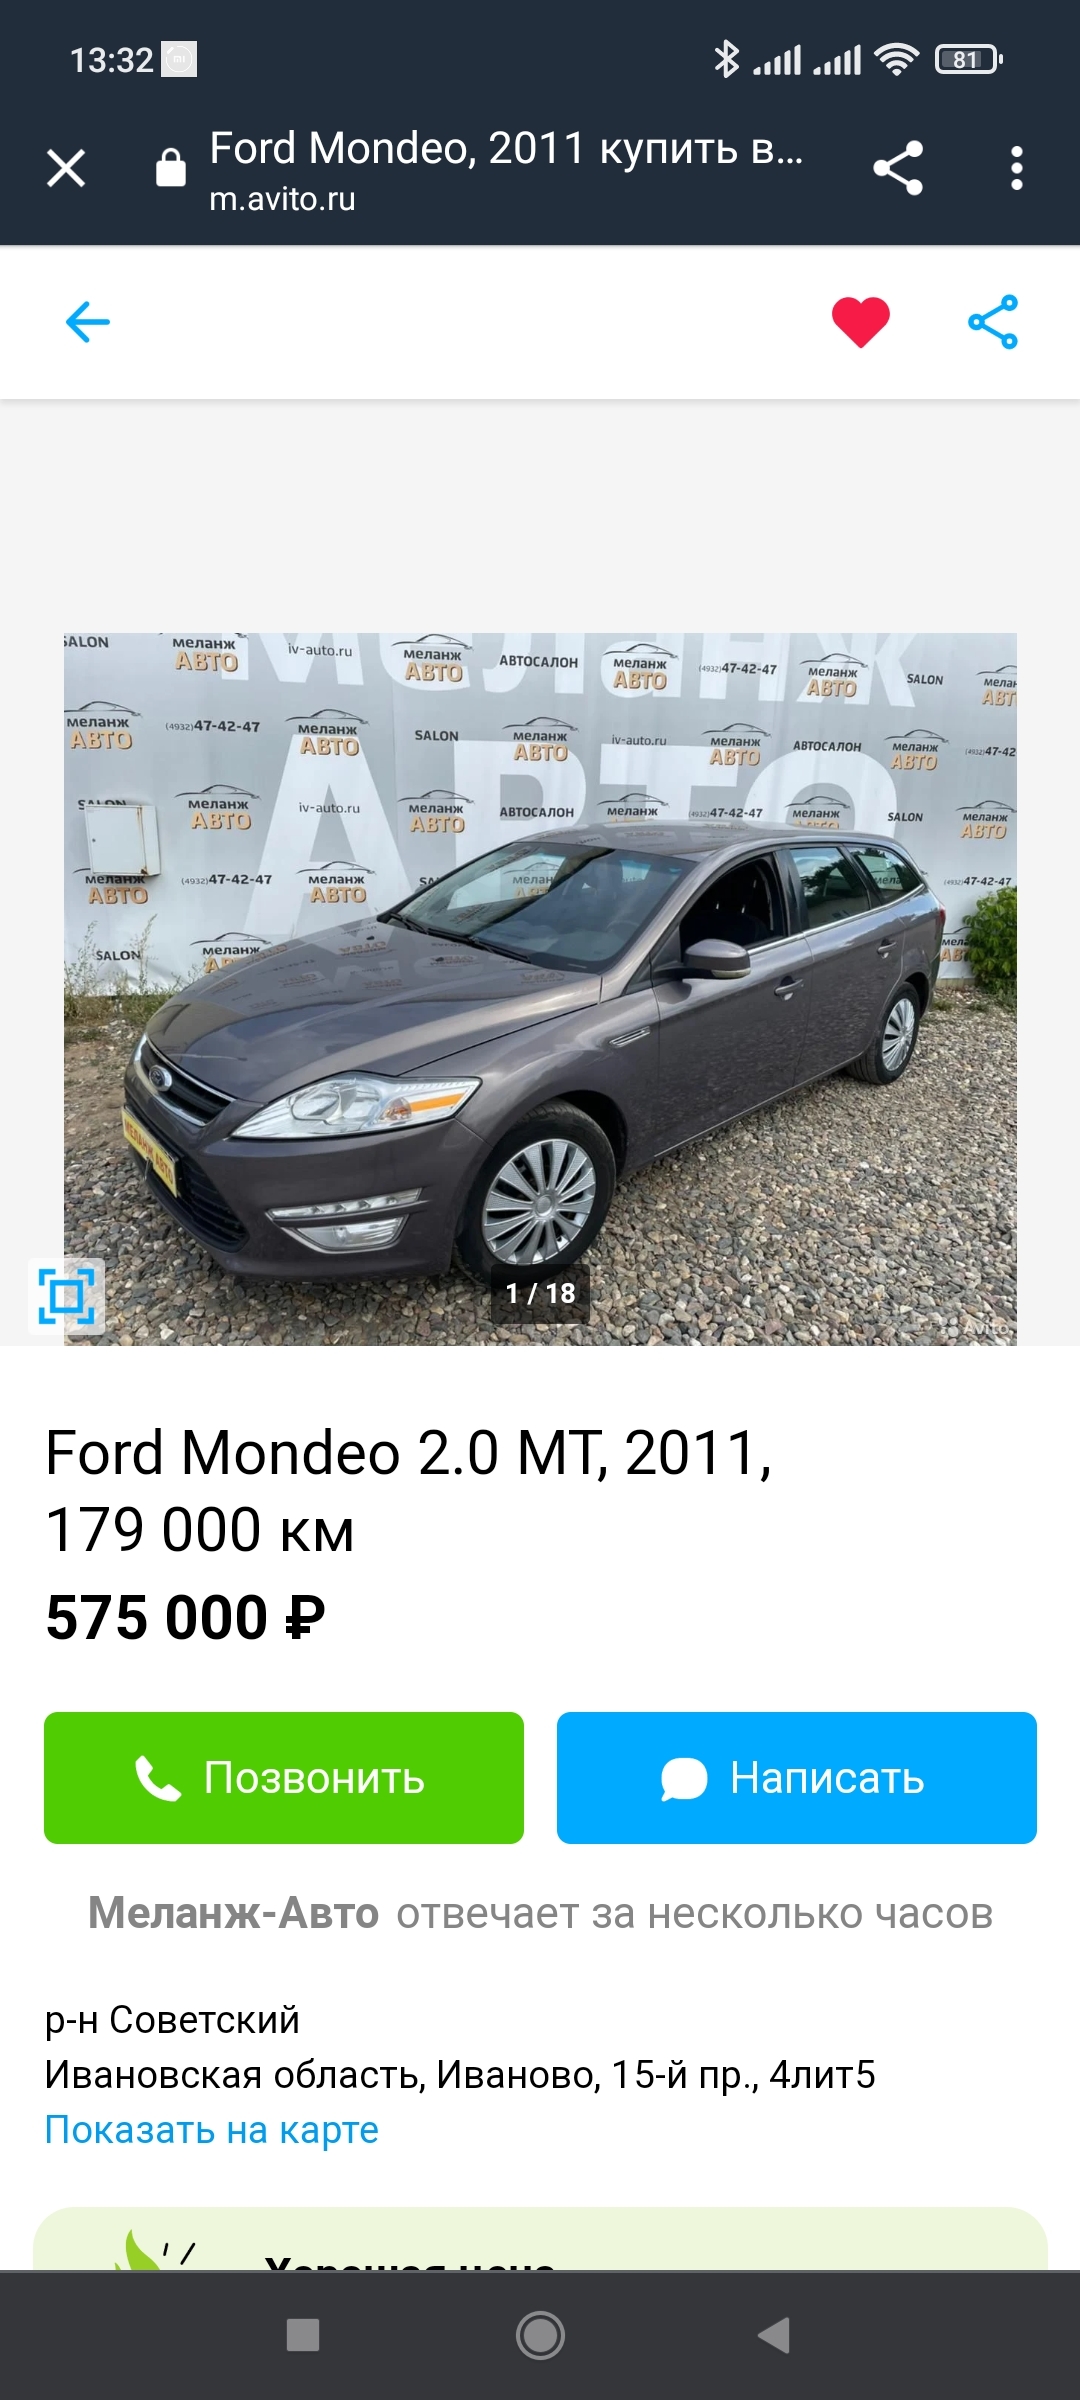 Outbid such outbid - My, Auto, Resellers, Deception, Ford Mondeo, Longpost, Negative